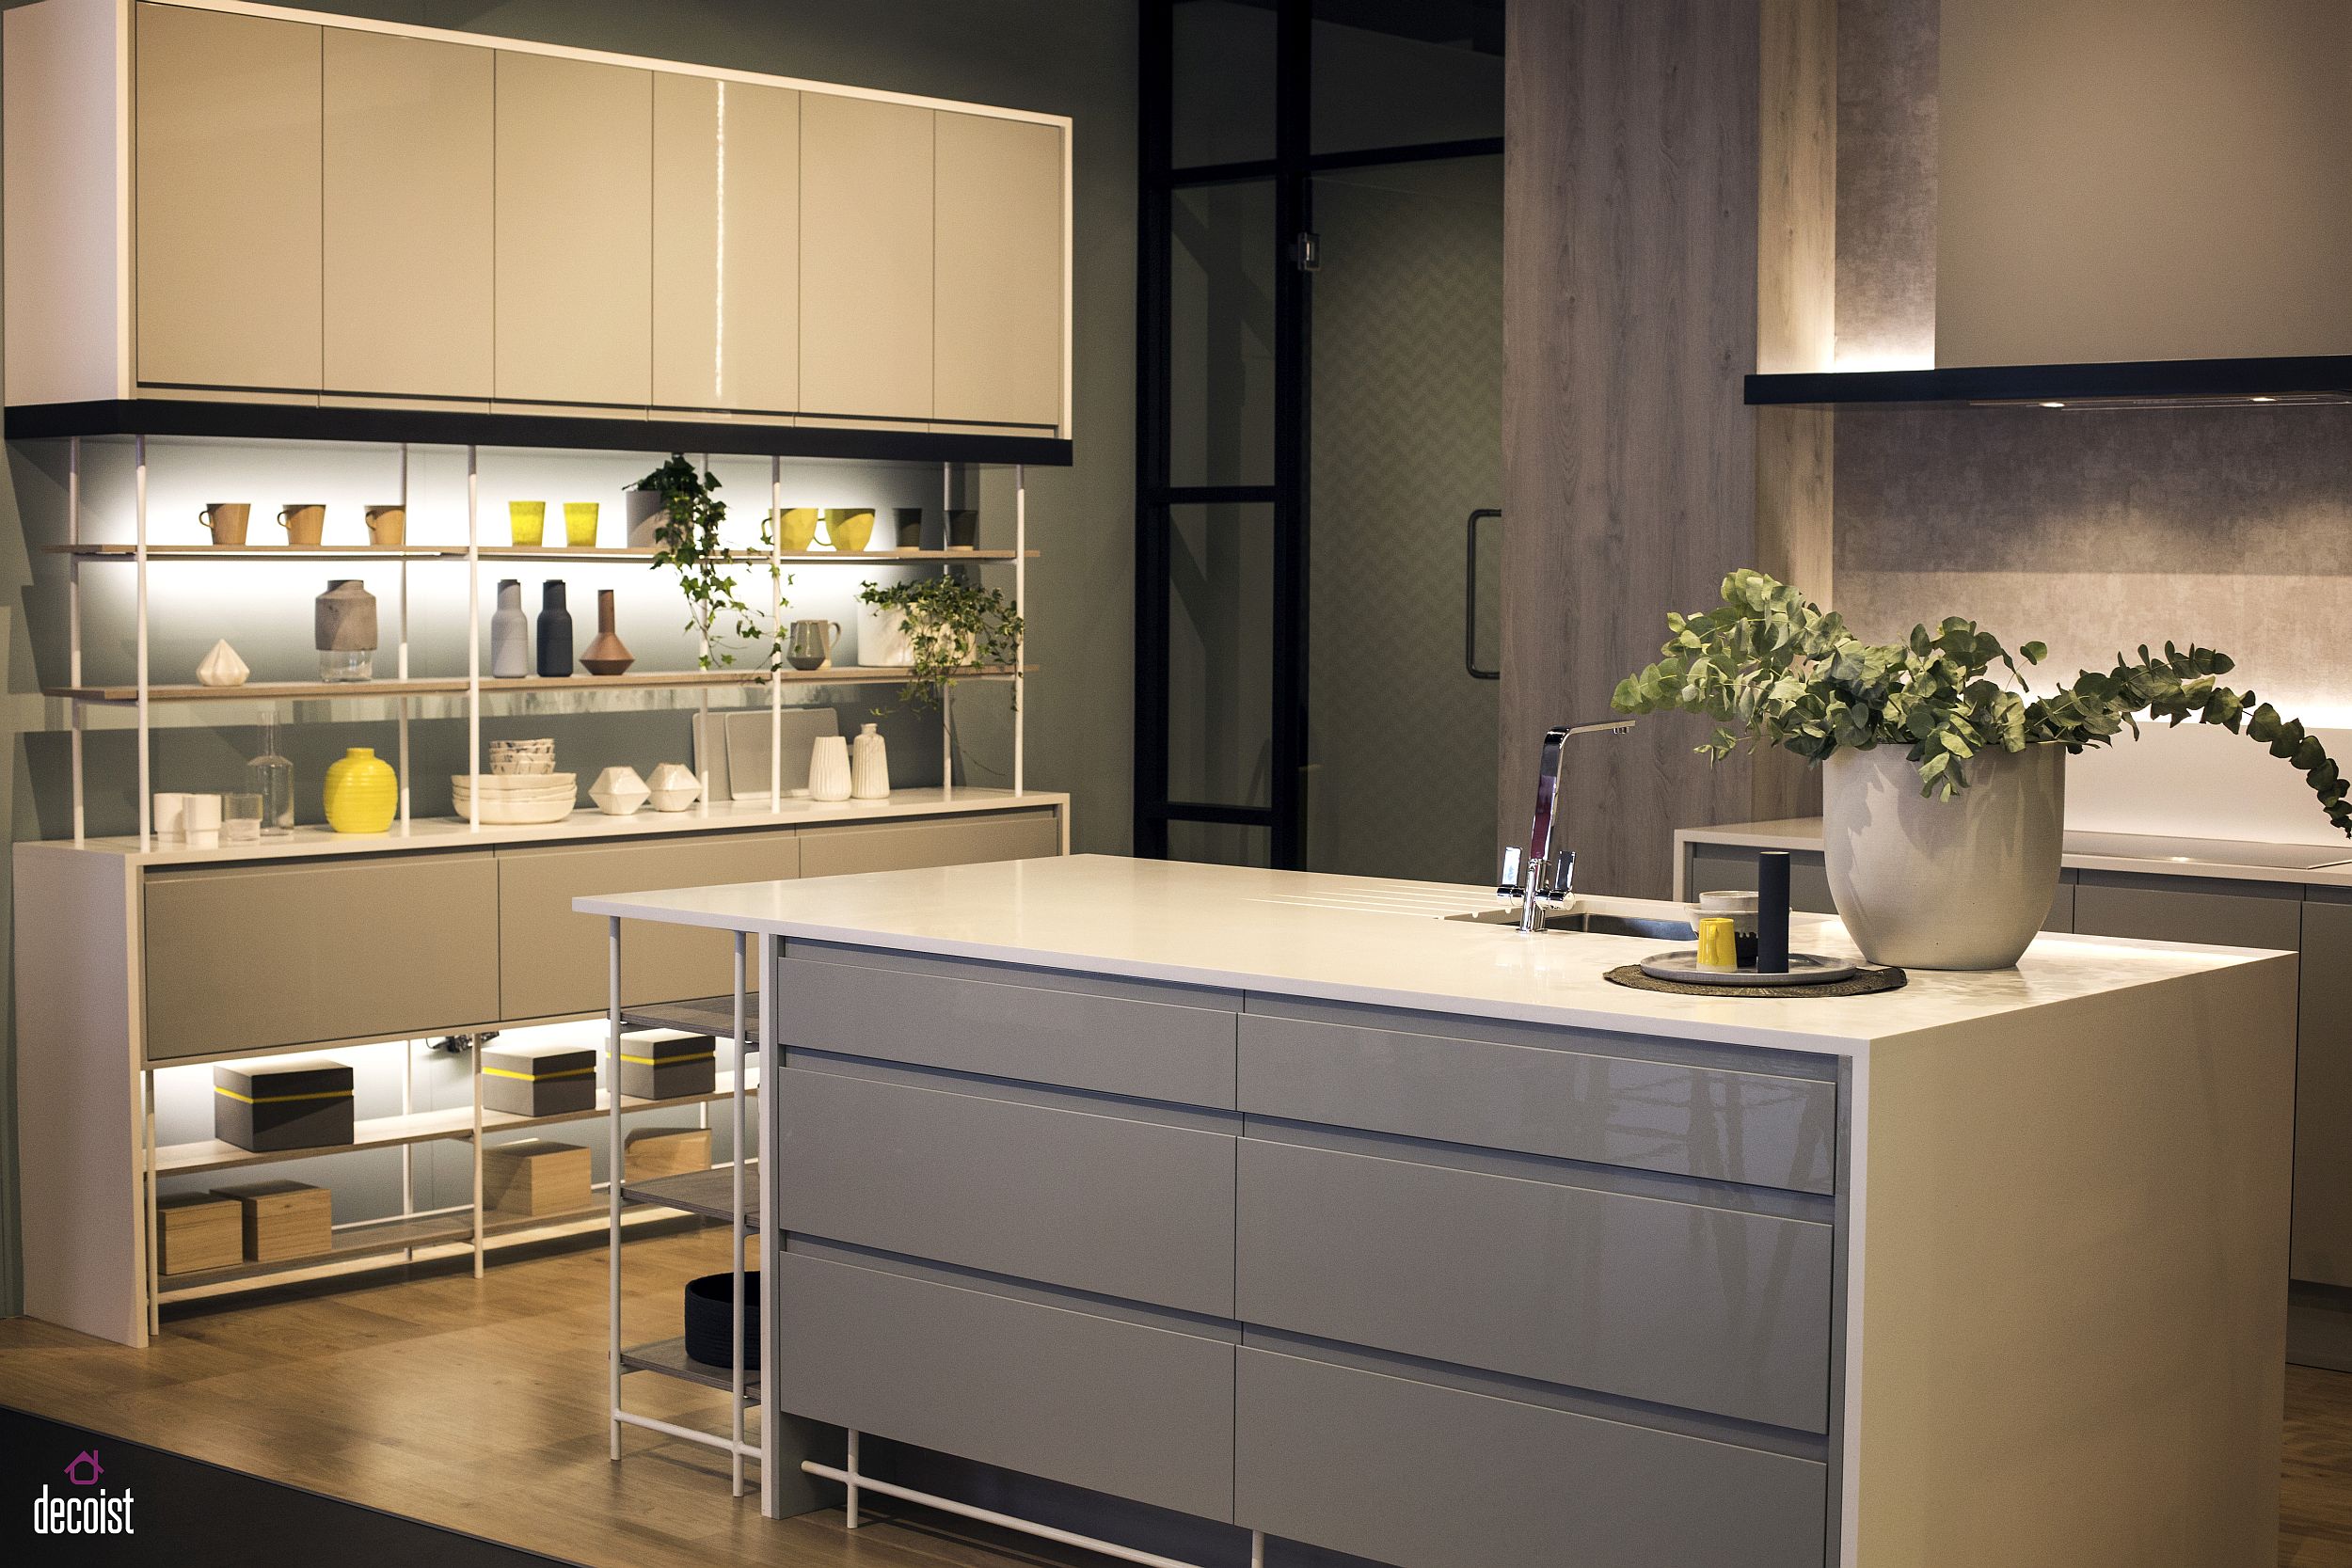 Space-savvy modern kitchen design with modular shelving from Howdens